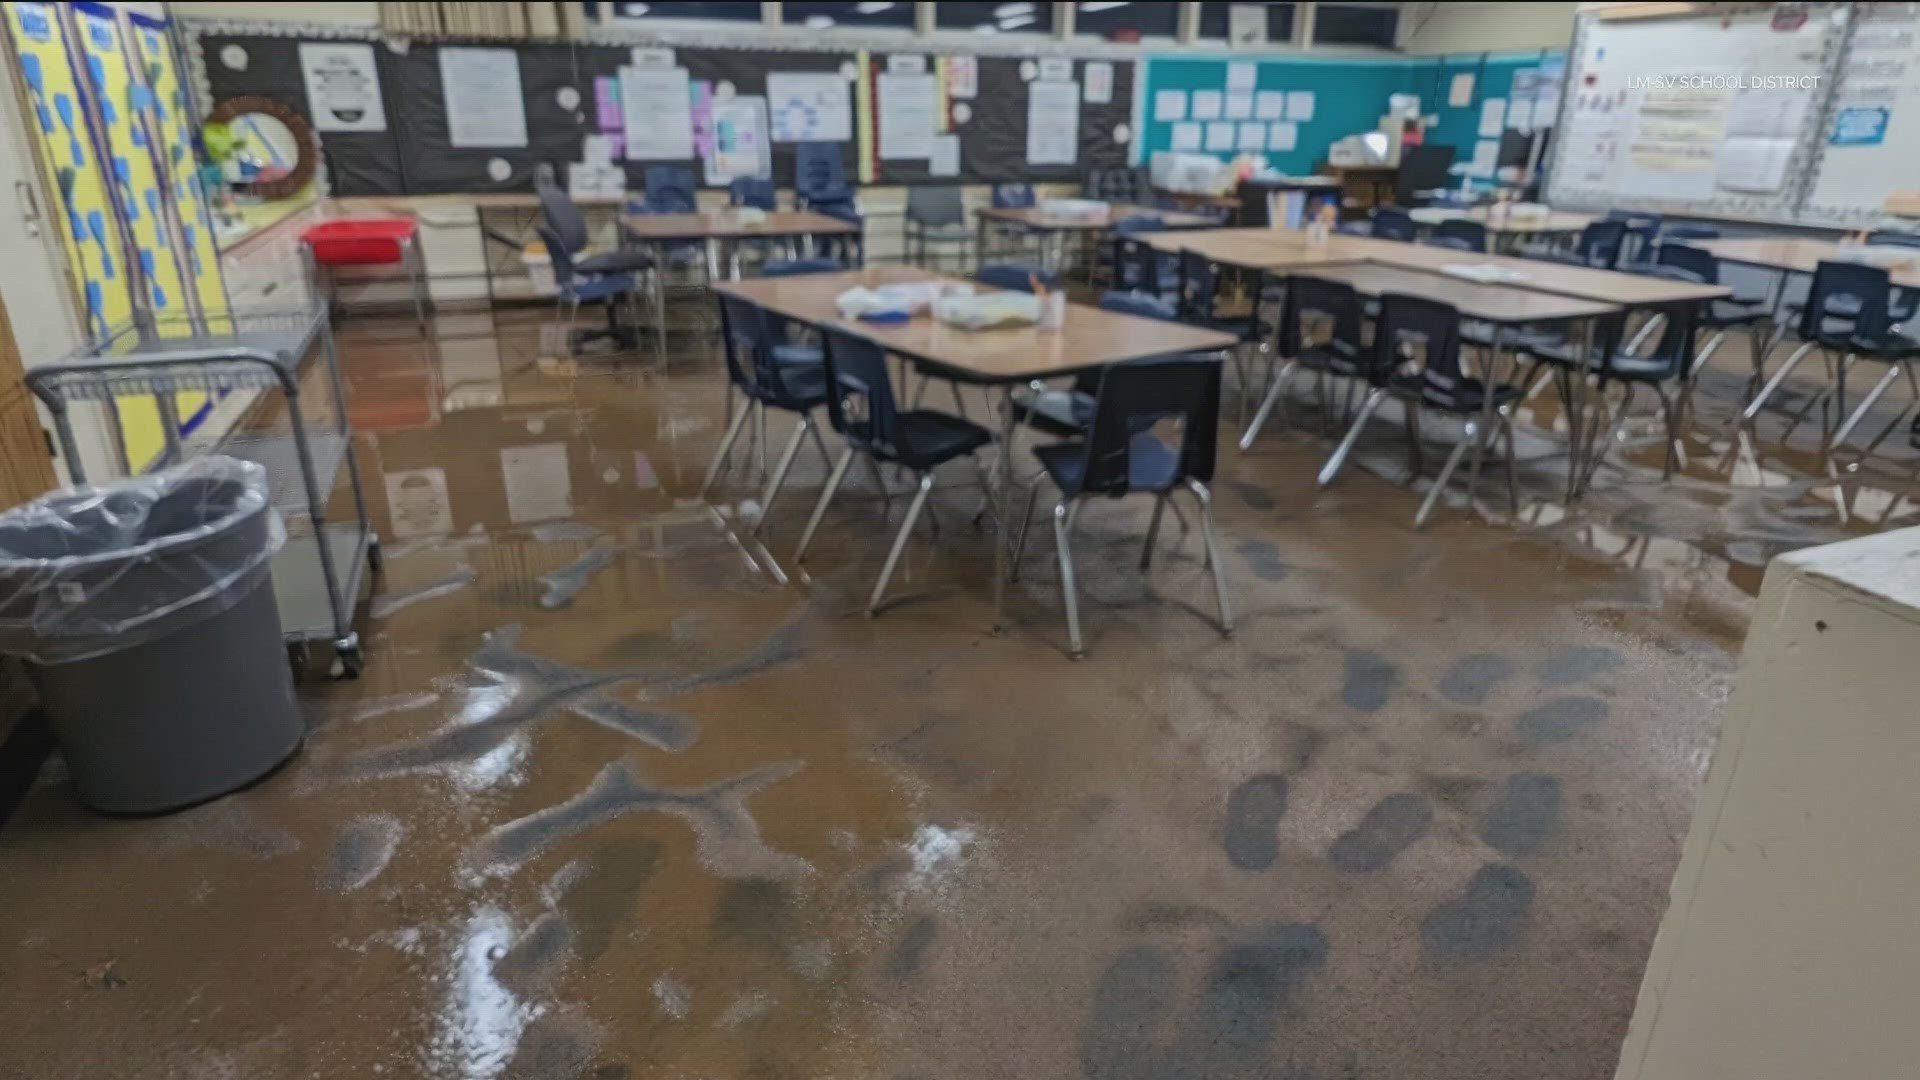 CBS 8 toured Bancroft Elementary School in Spring Valley to see the damages caused by floodwaters.